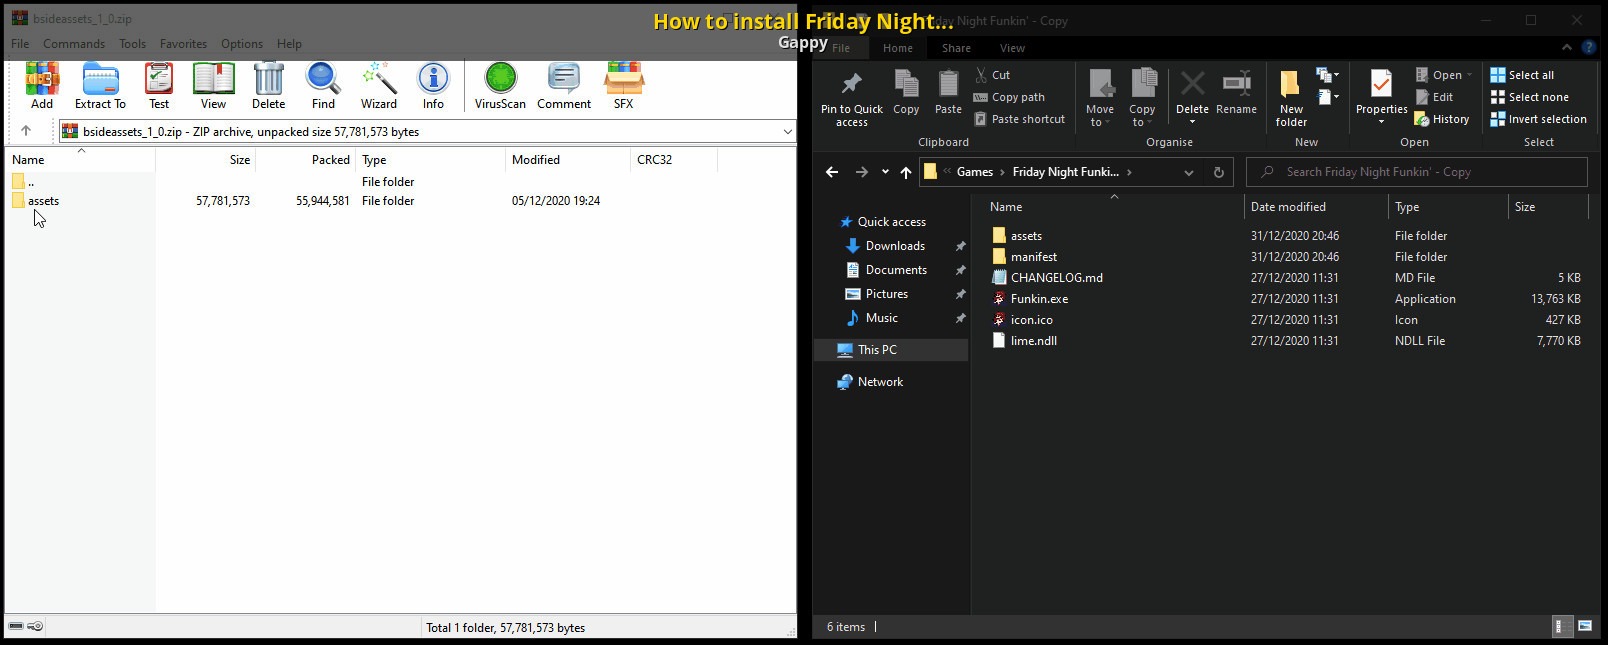 Download Mod Friday Night Funkin Launcher (Unofficial) on PC with MEmu